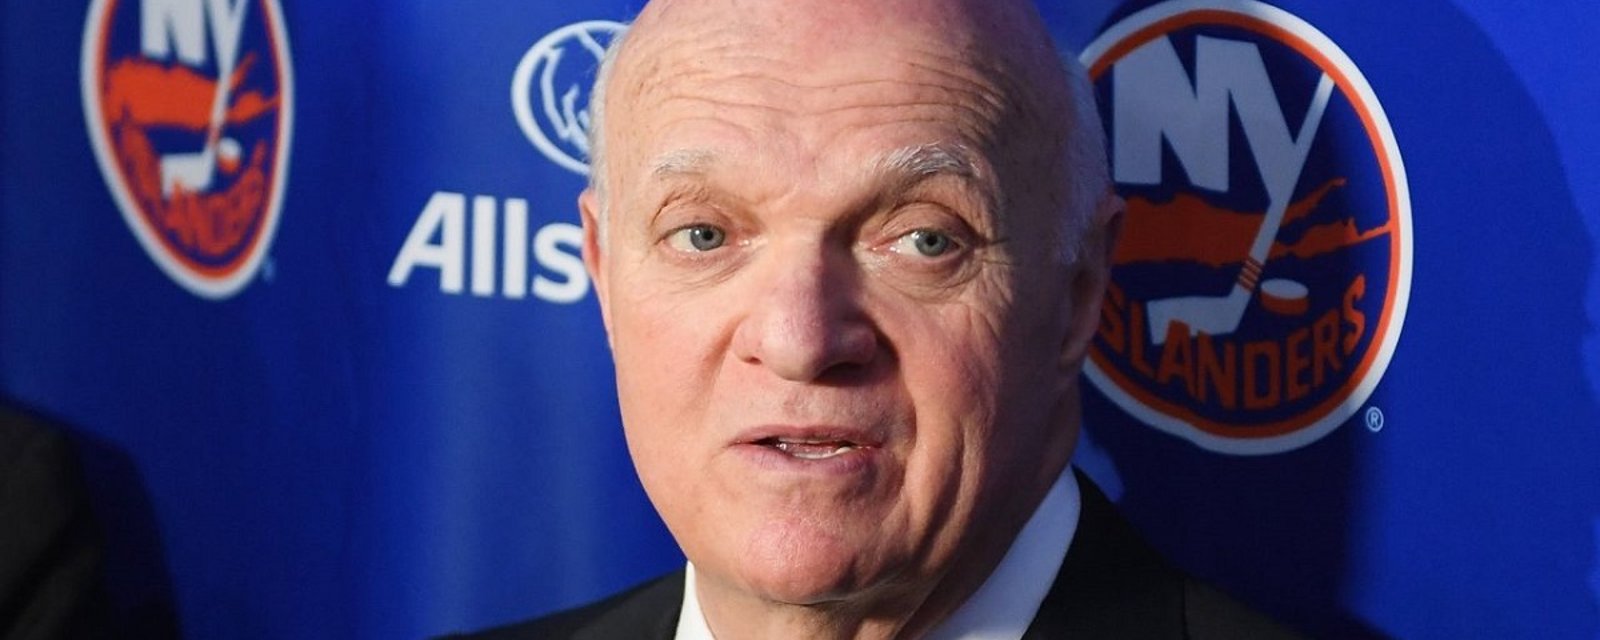 Lou Lamoriello forces Patrick Roy to bend to his rules on Day 1.